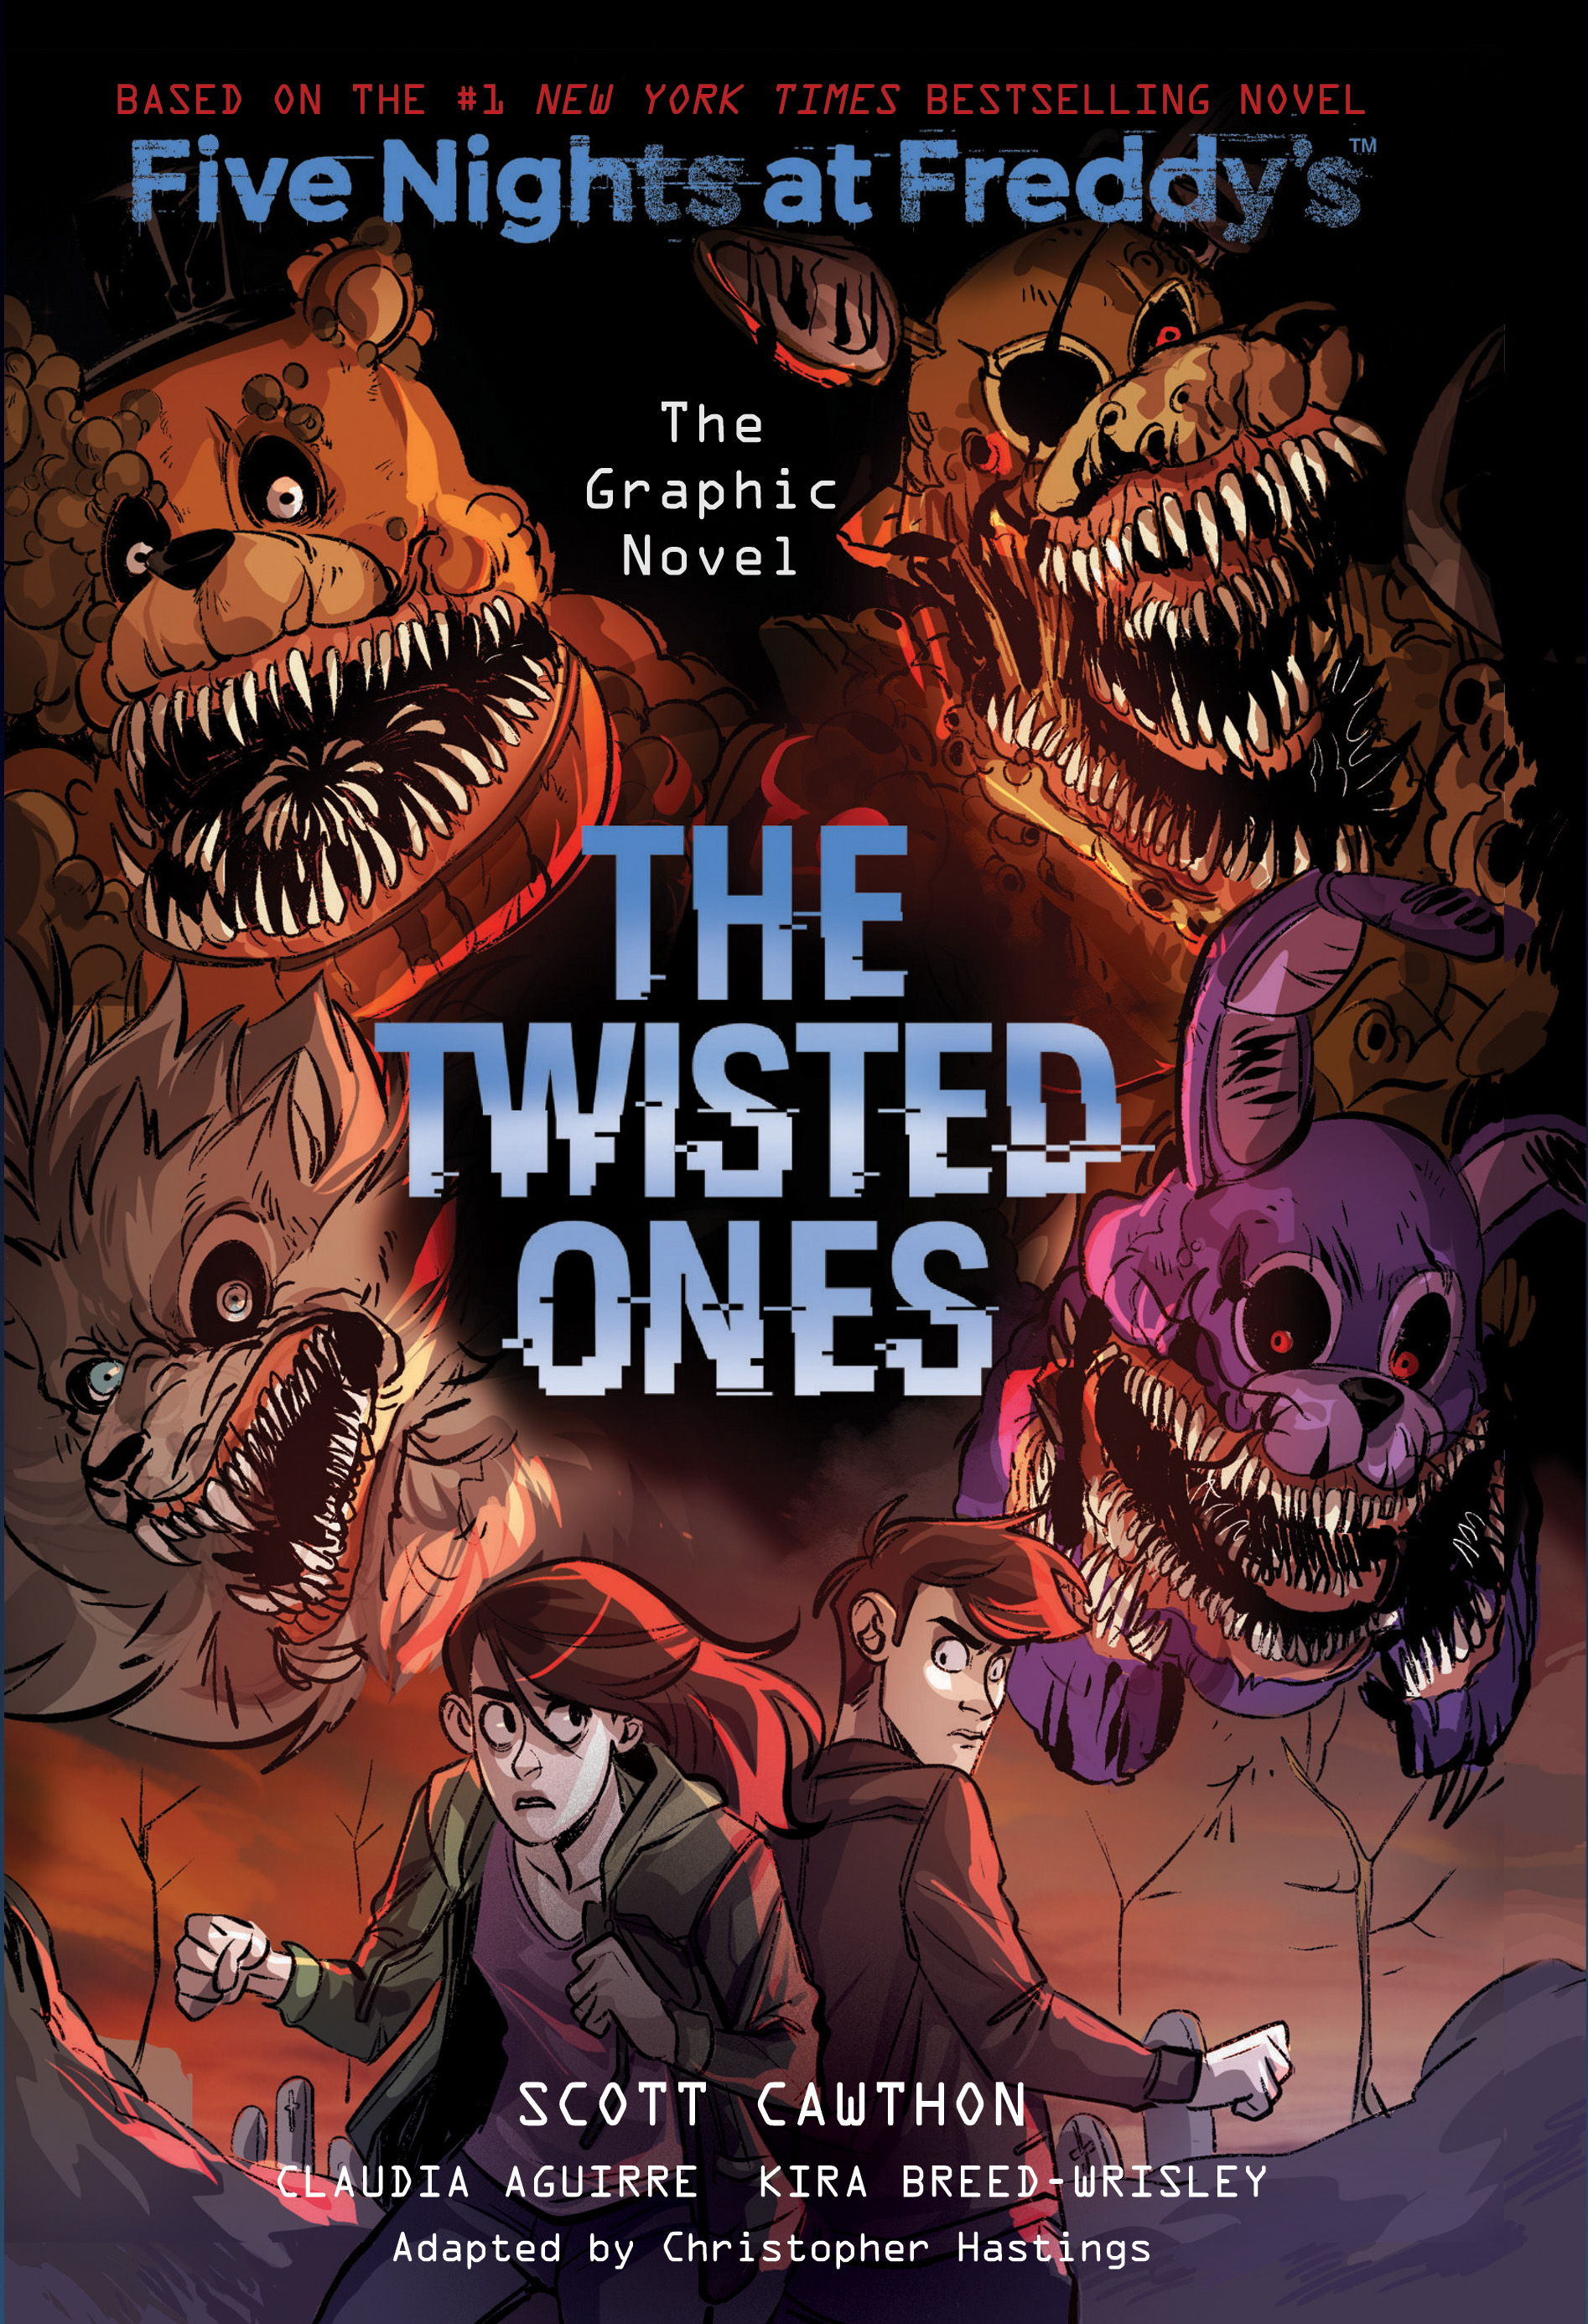 The Twisted Ones: Five Nights at Freddy’s (Five Nights at Freddy’s Graphic Novel #2) (2) (Five Nights at Freddy's Graphic Novels)